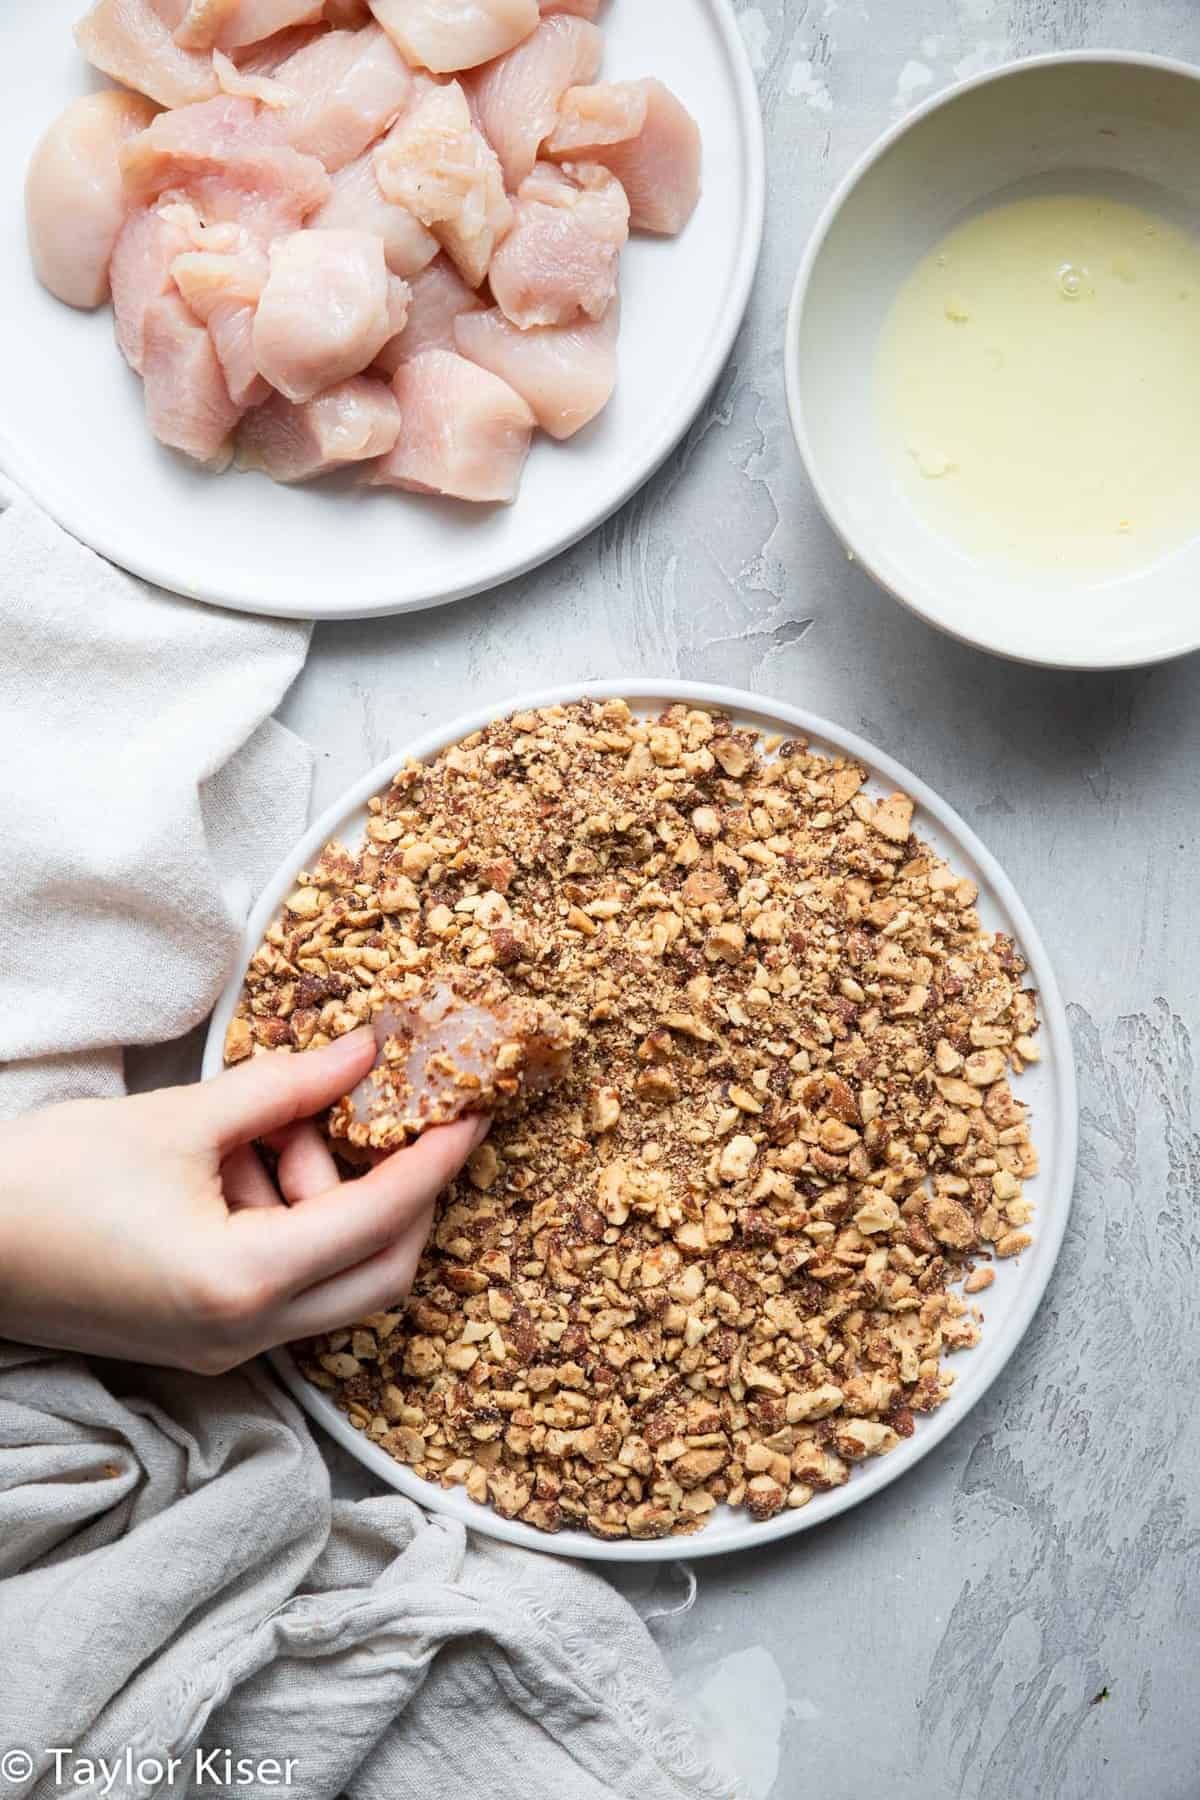 ingredients to make almond crusted chicken bites